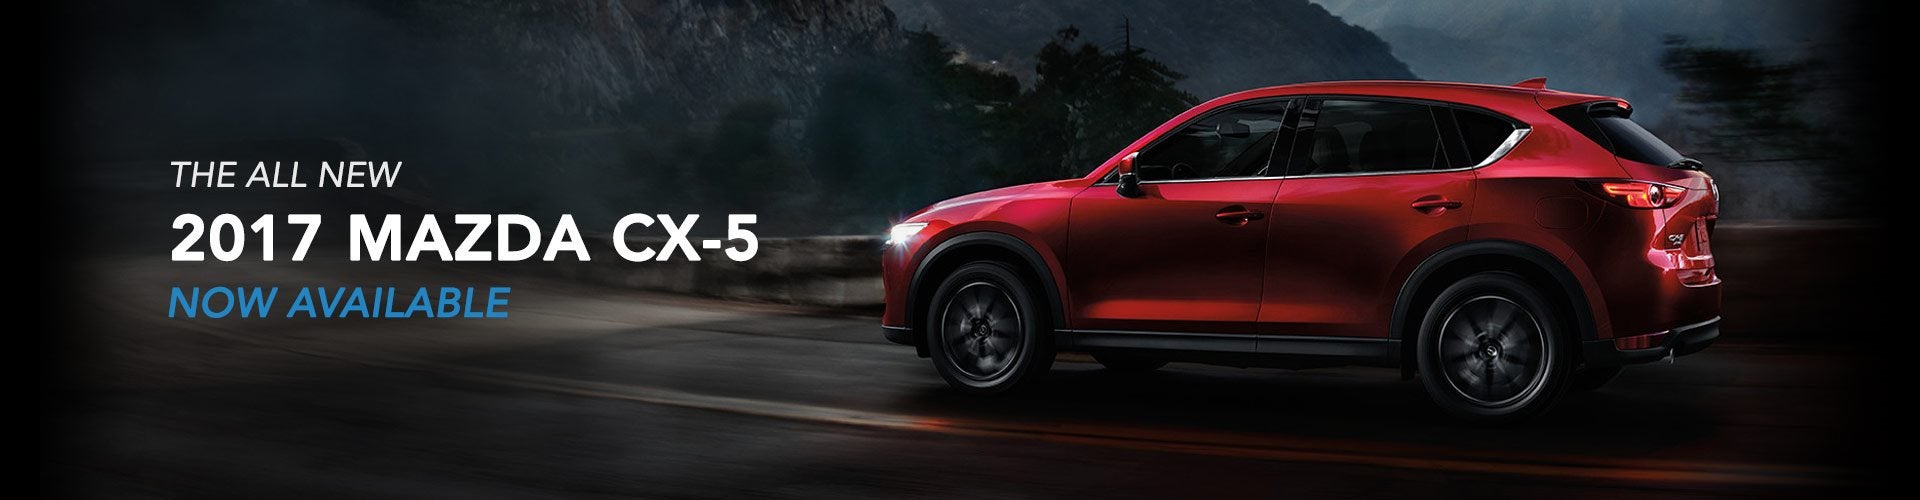 2017 Mazda CX-5 - Now Available